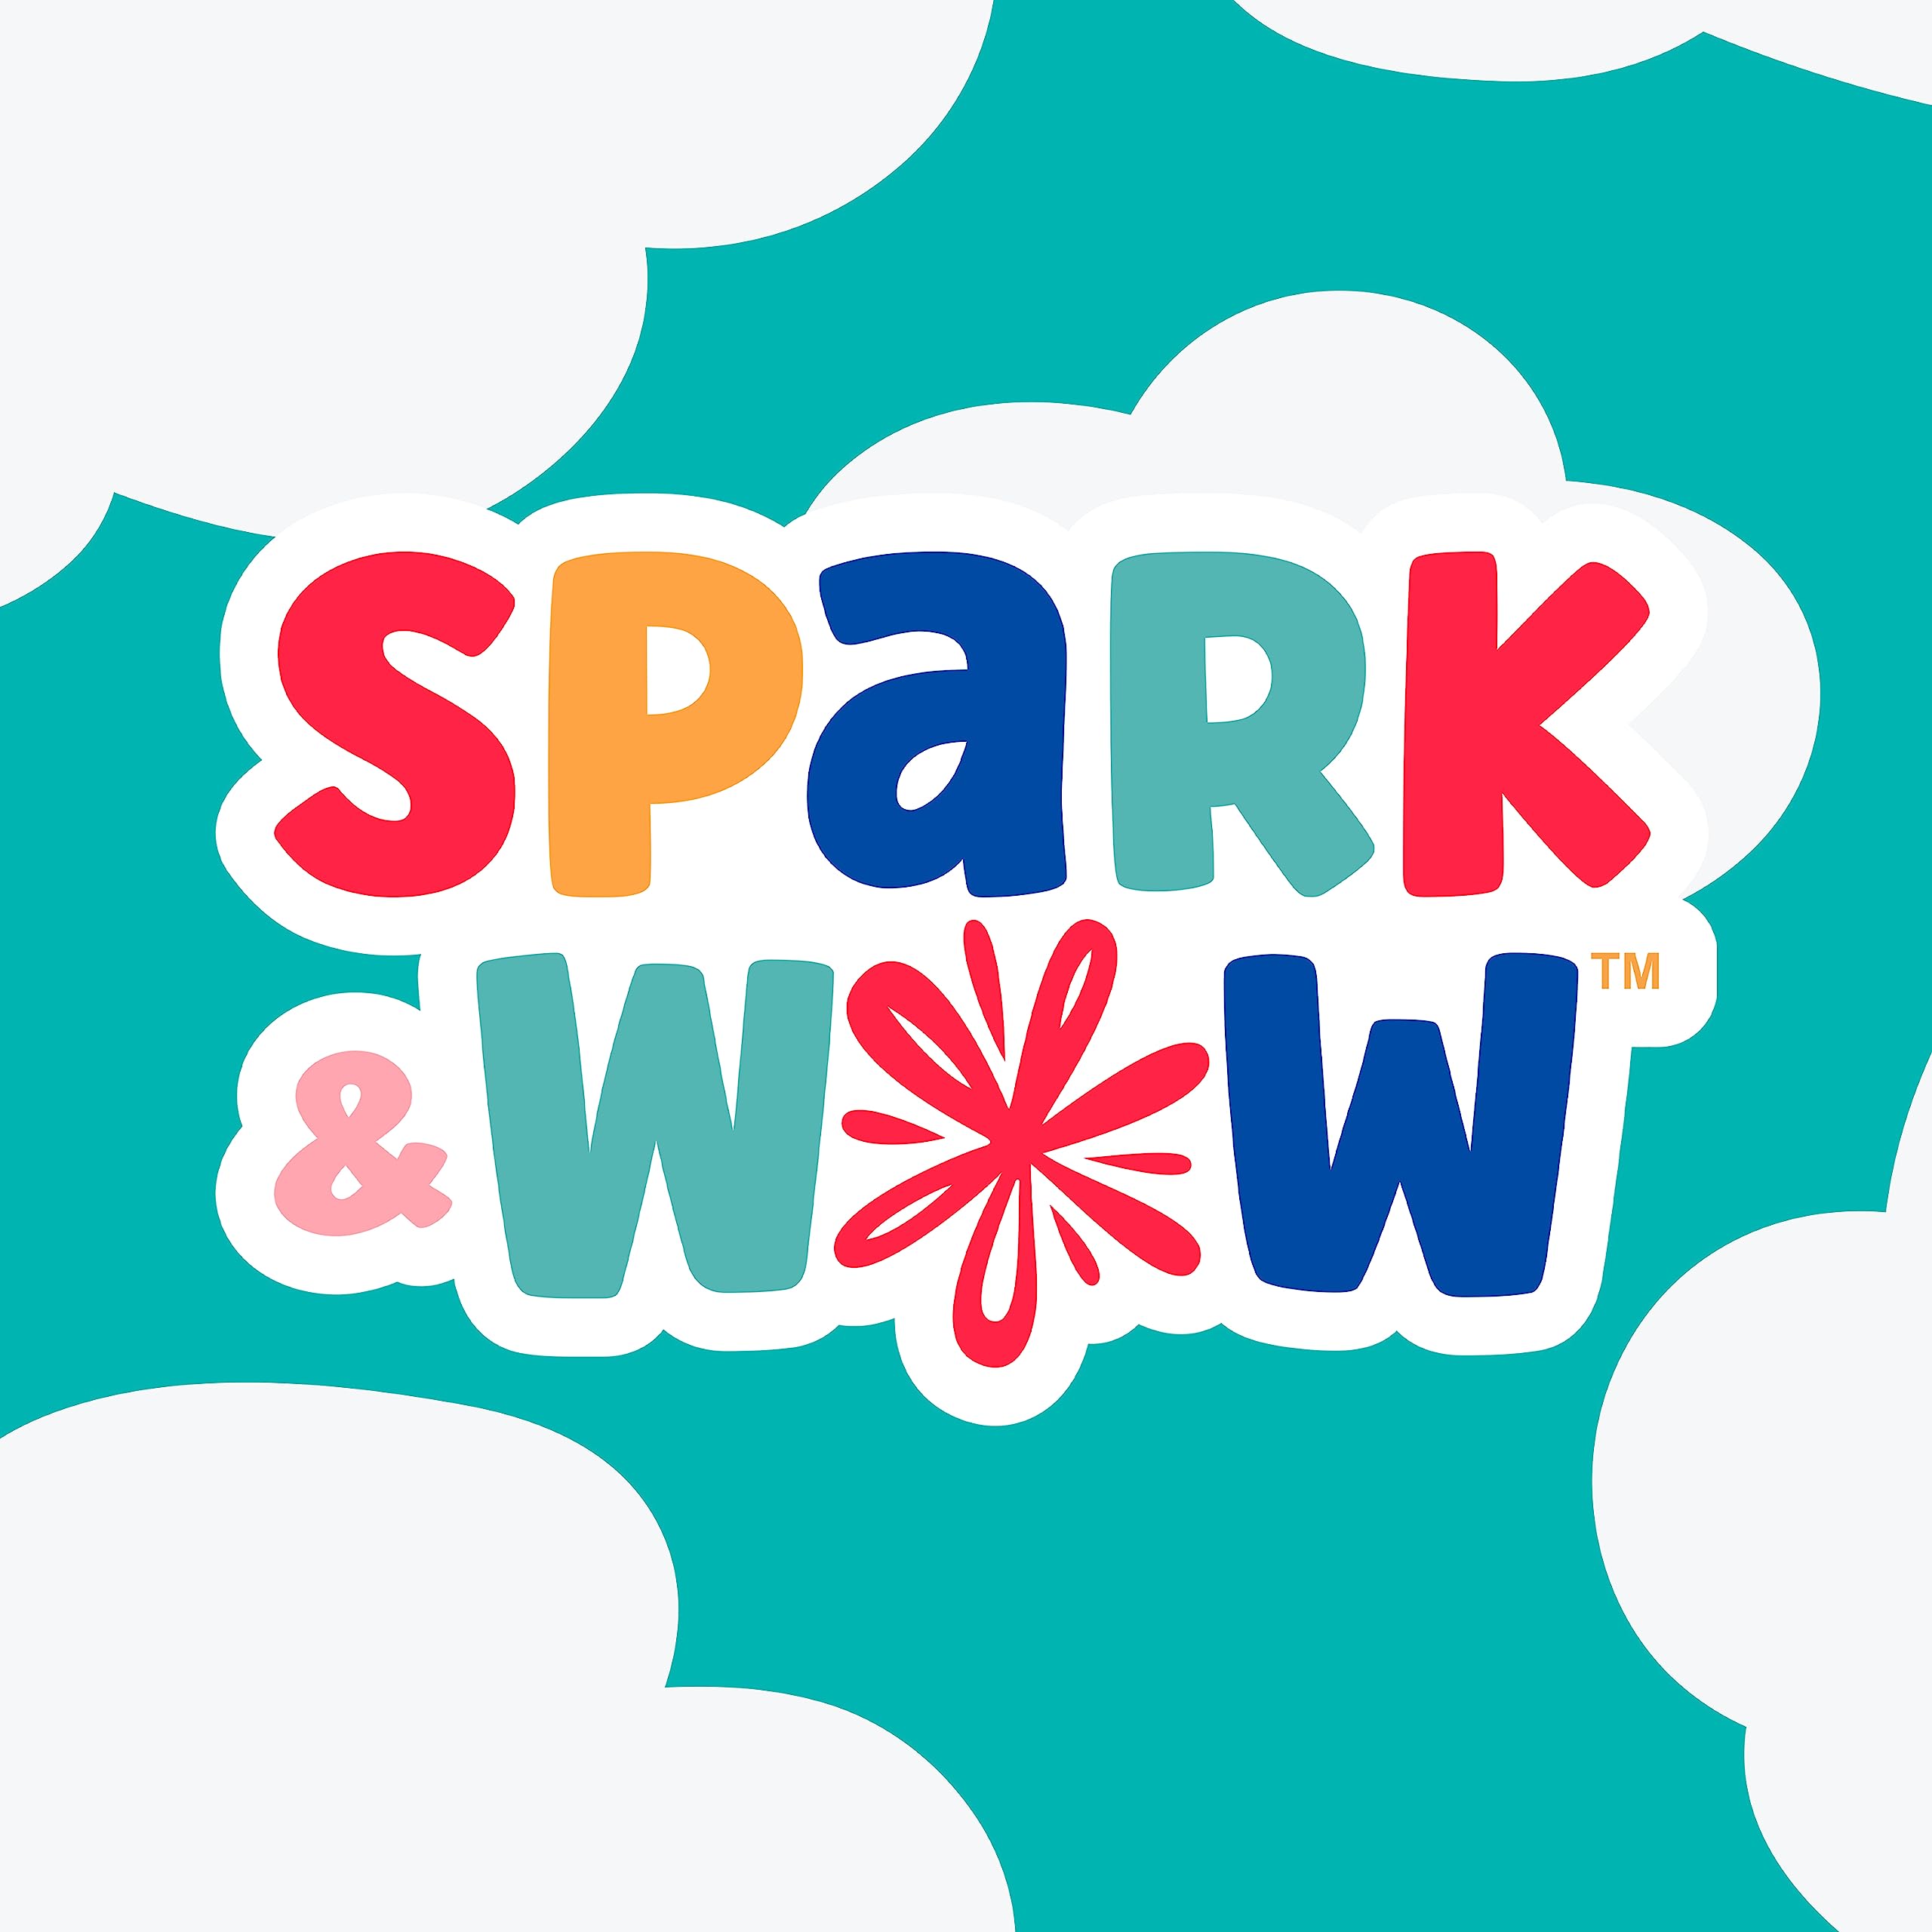 SPARK & WOW Airplane Activity Wall Panels - Ages 18m+ - Montessori Sensory Wall Toy - 6 Activities - Busy Board - Toddler Room Decor